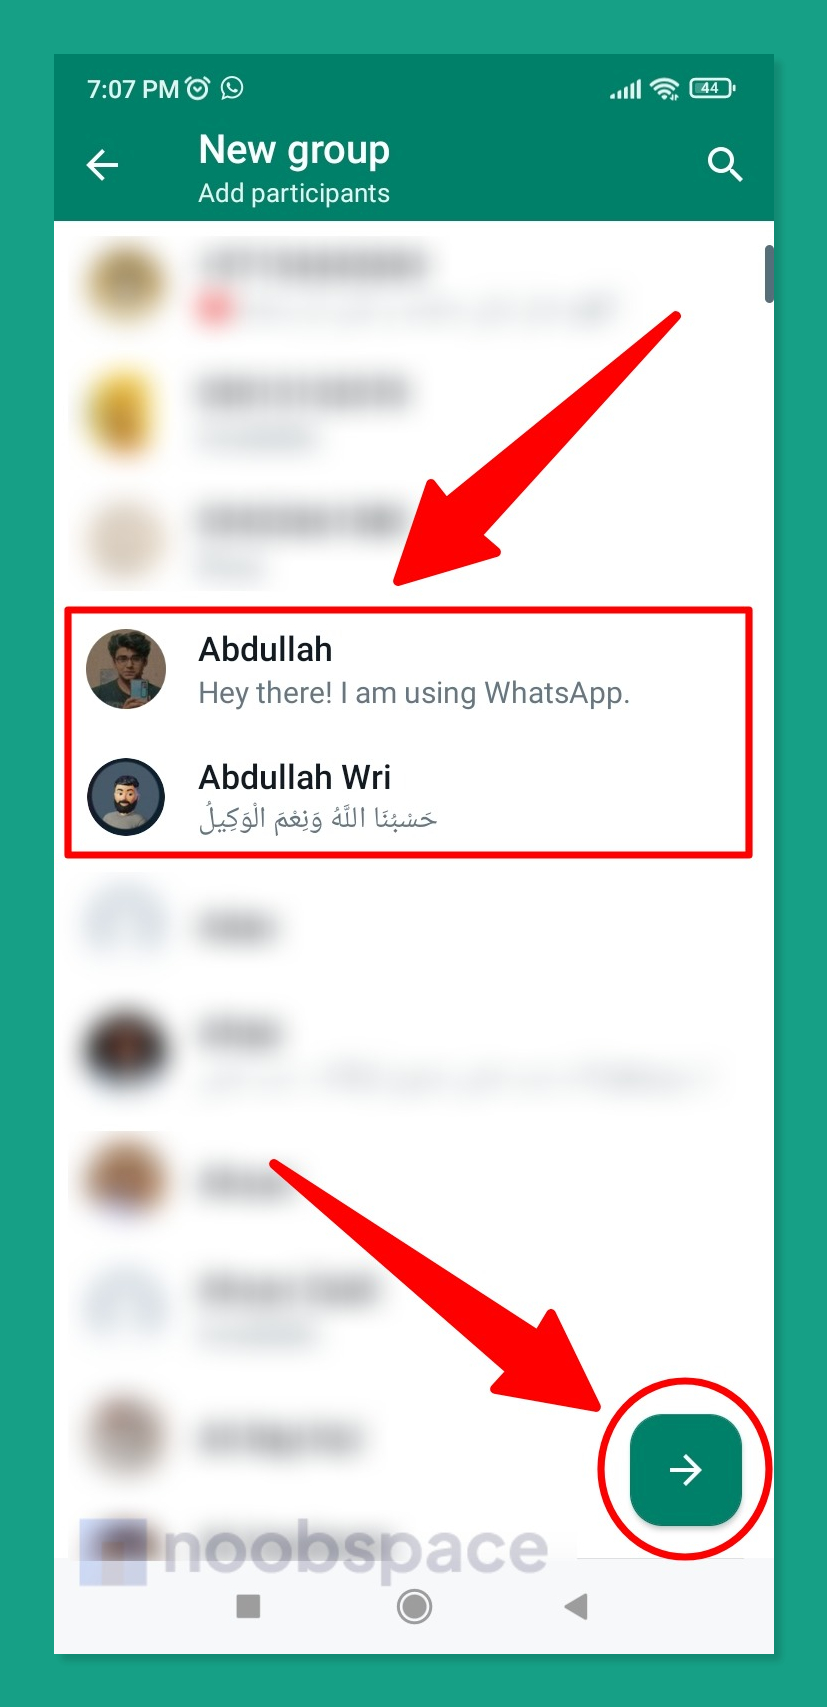 Adding participants in a WhatsApp group